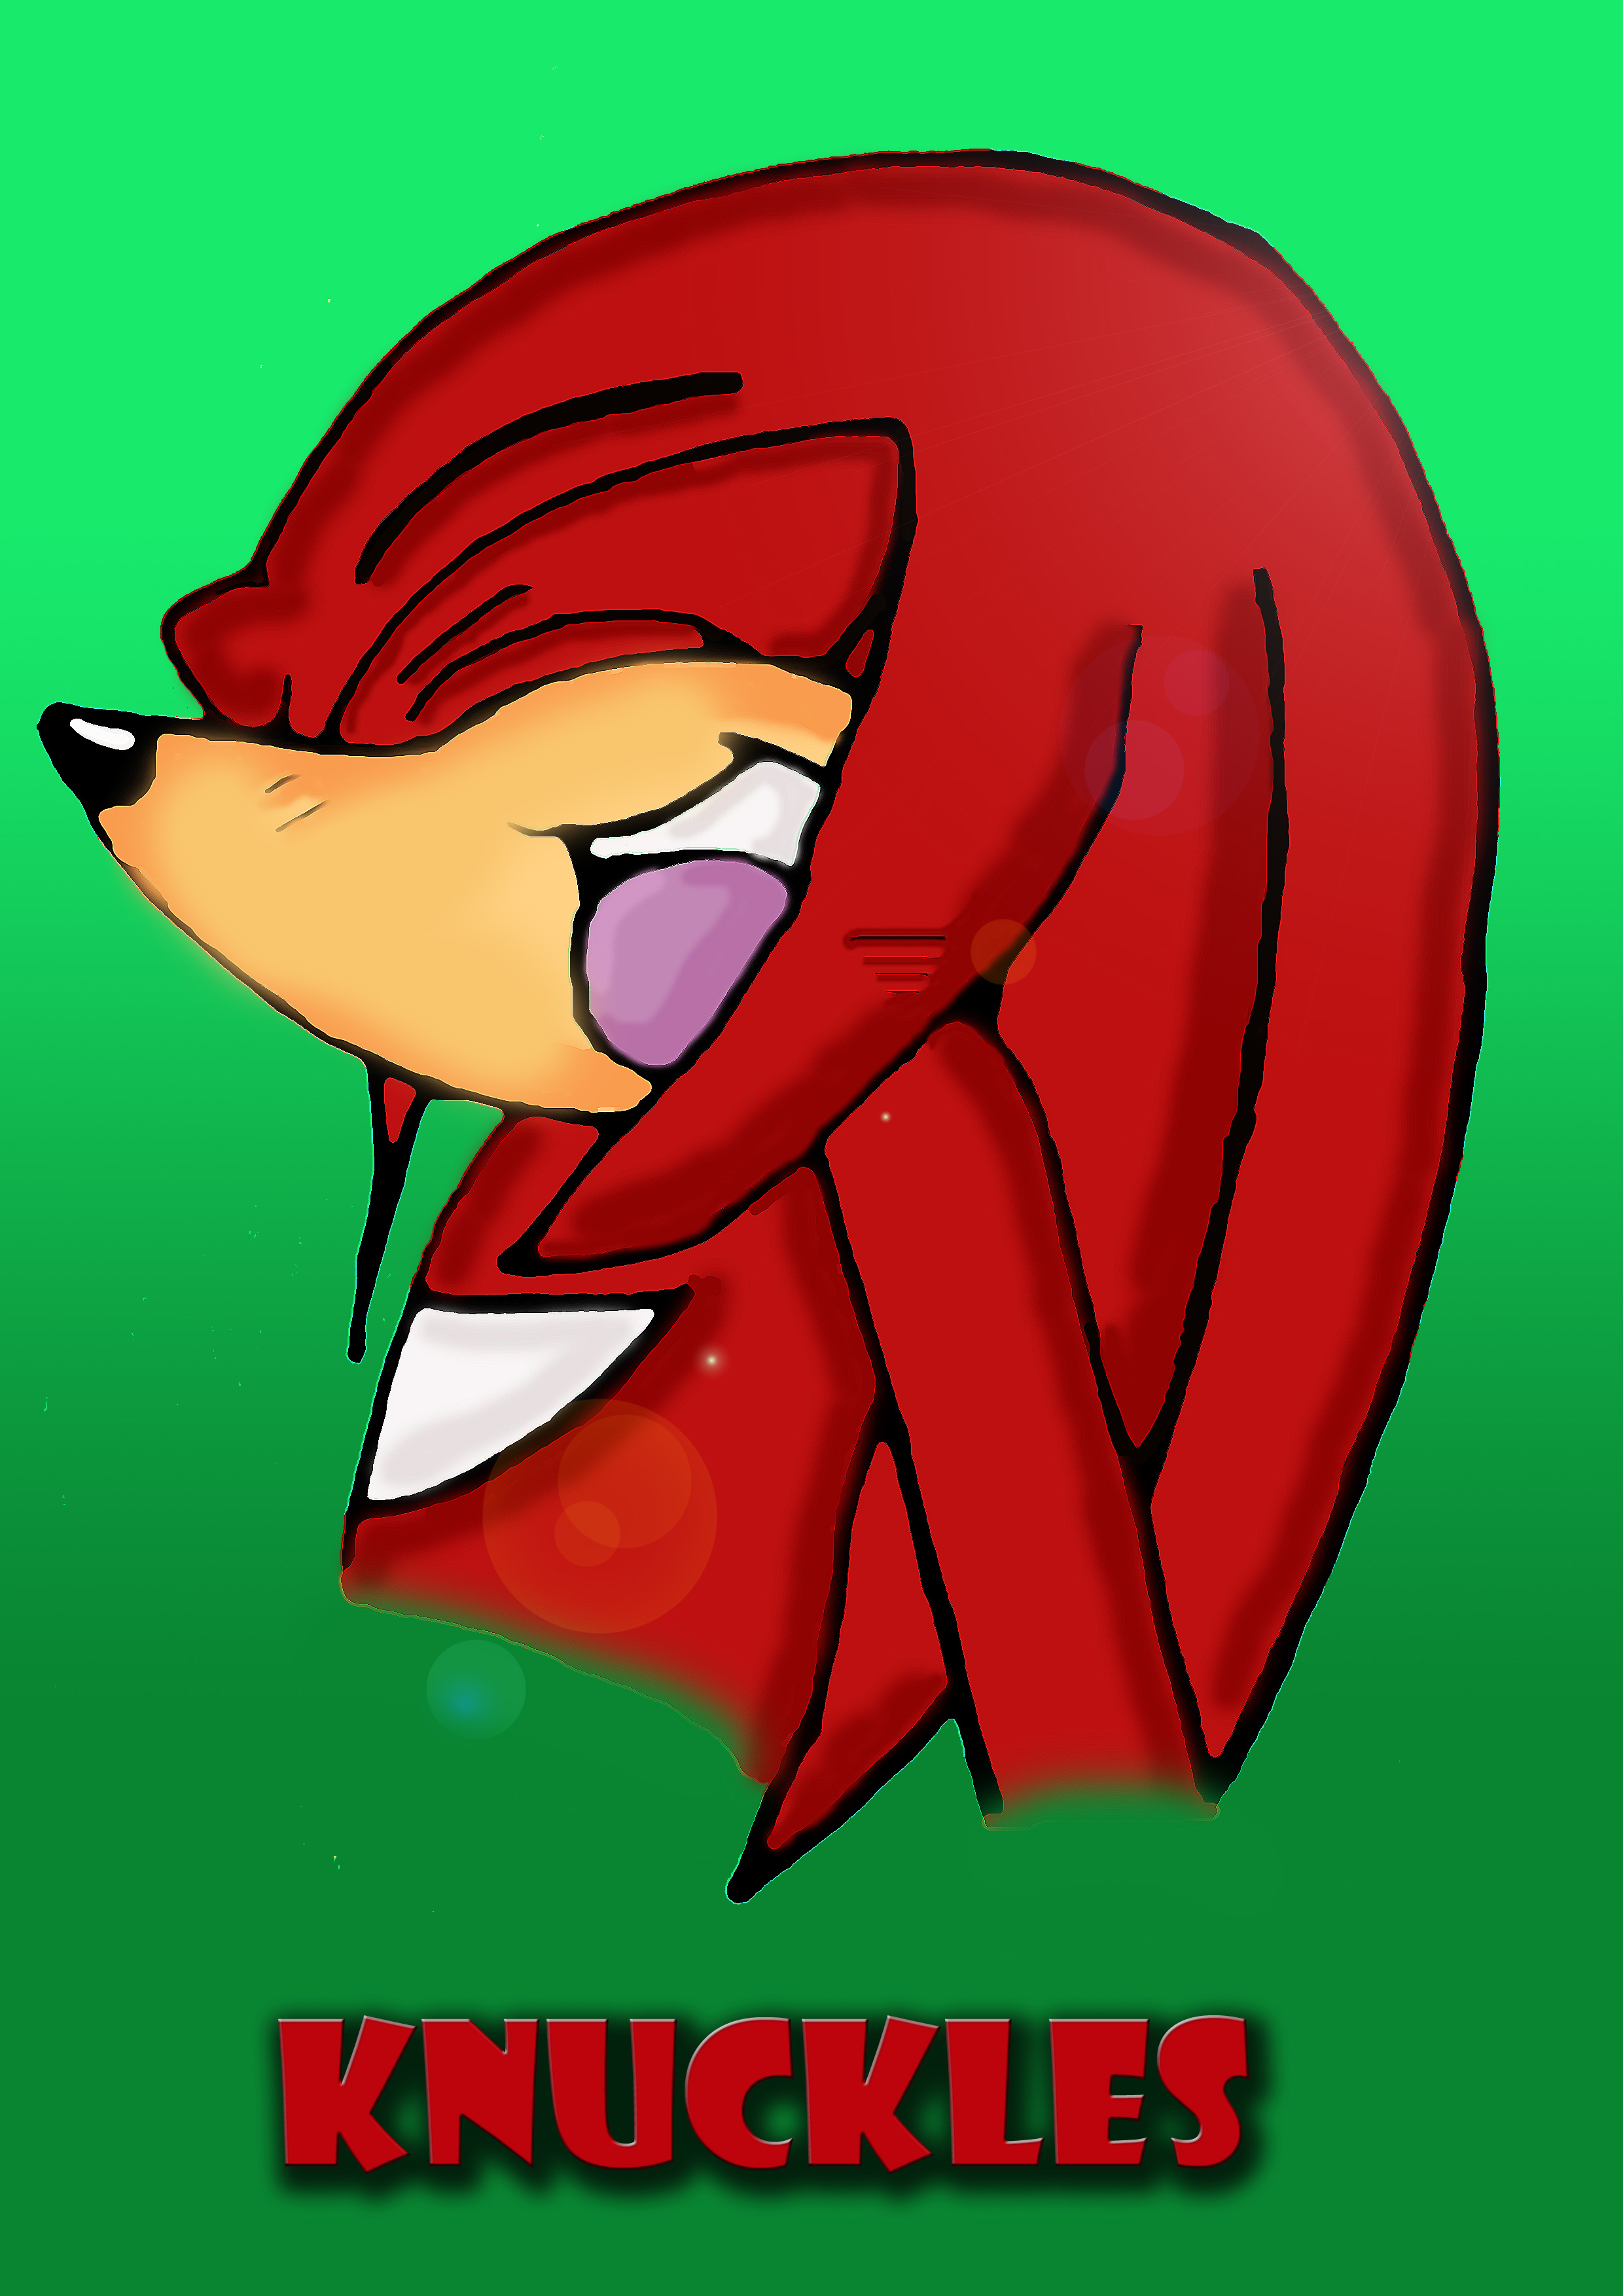 knuckles by phoenixh20